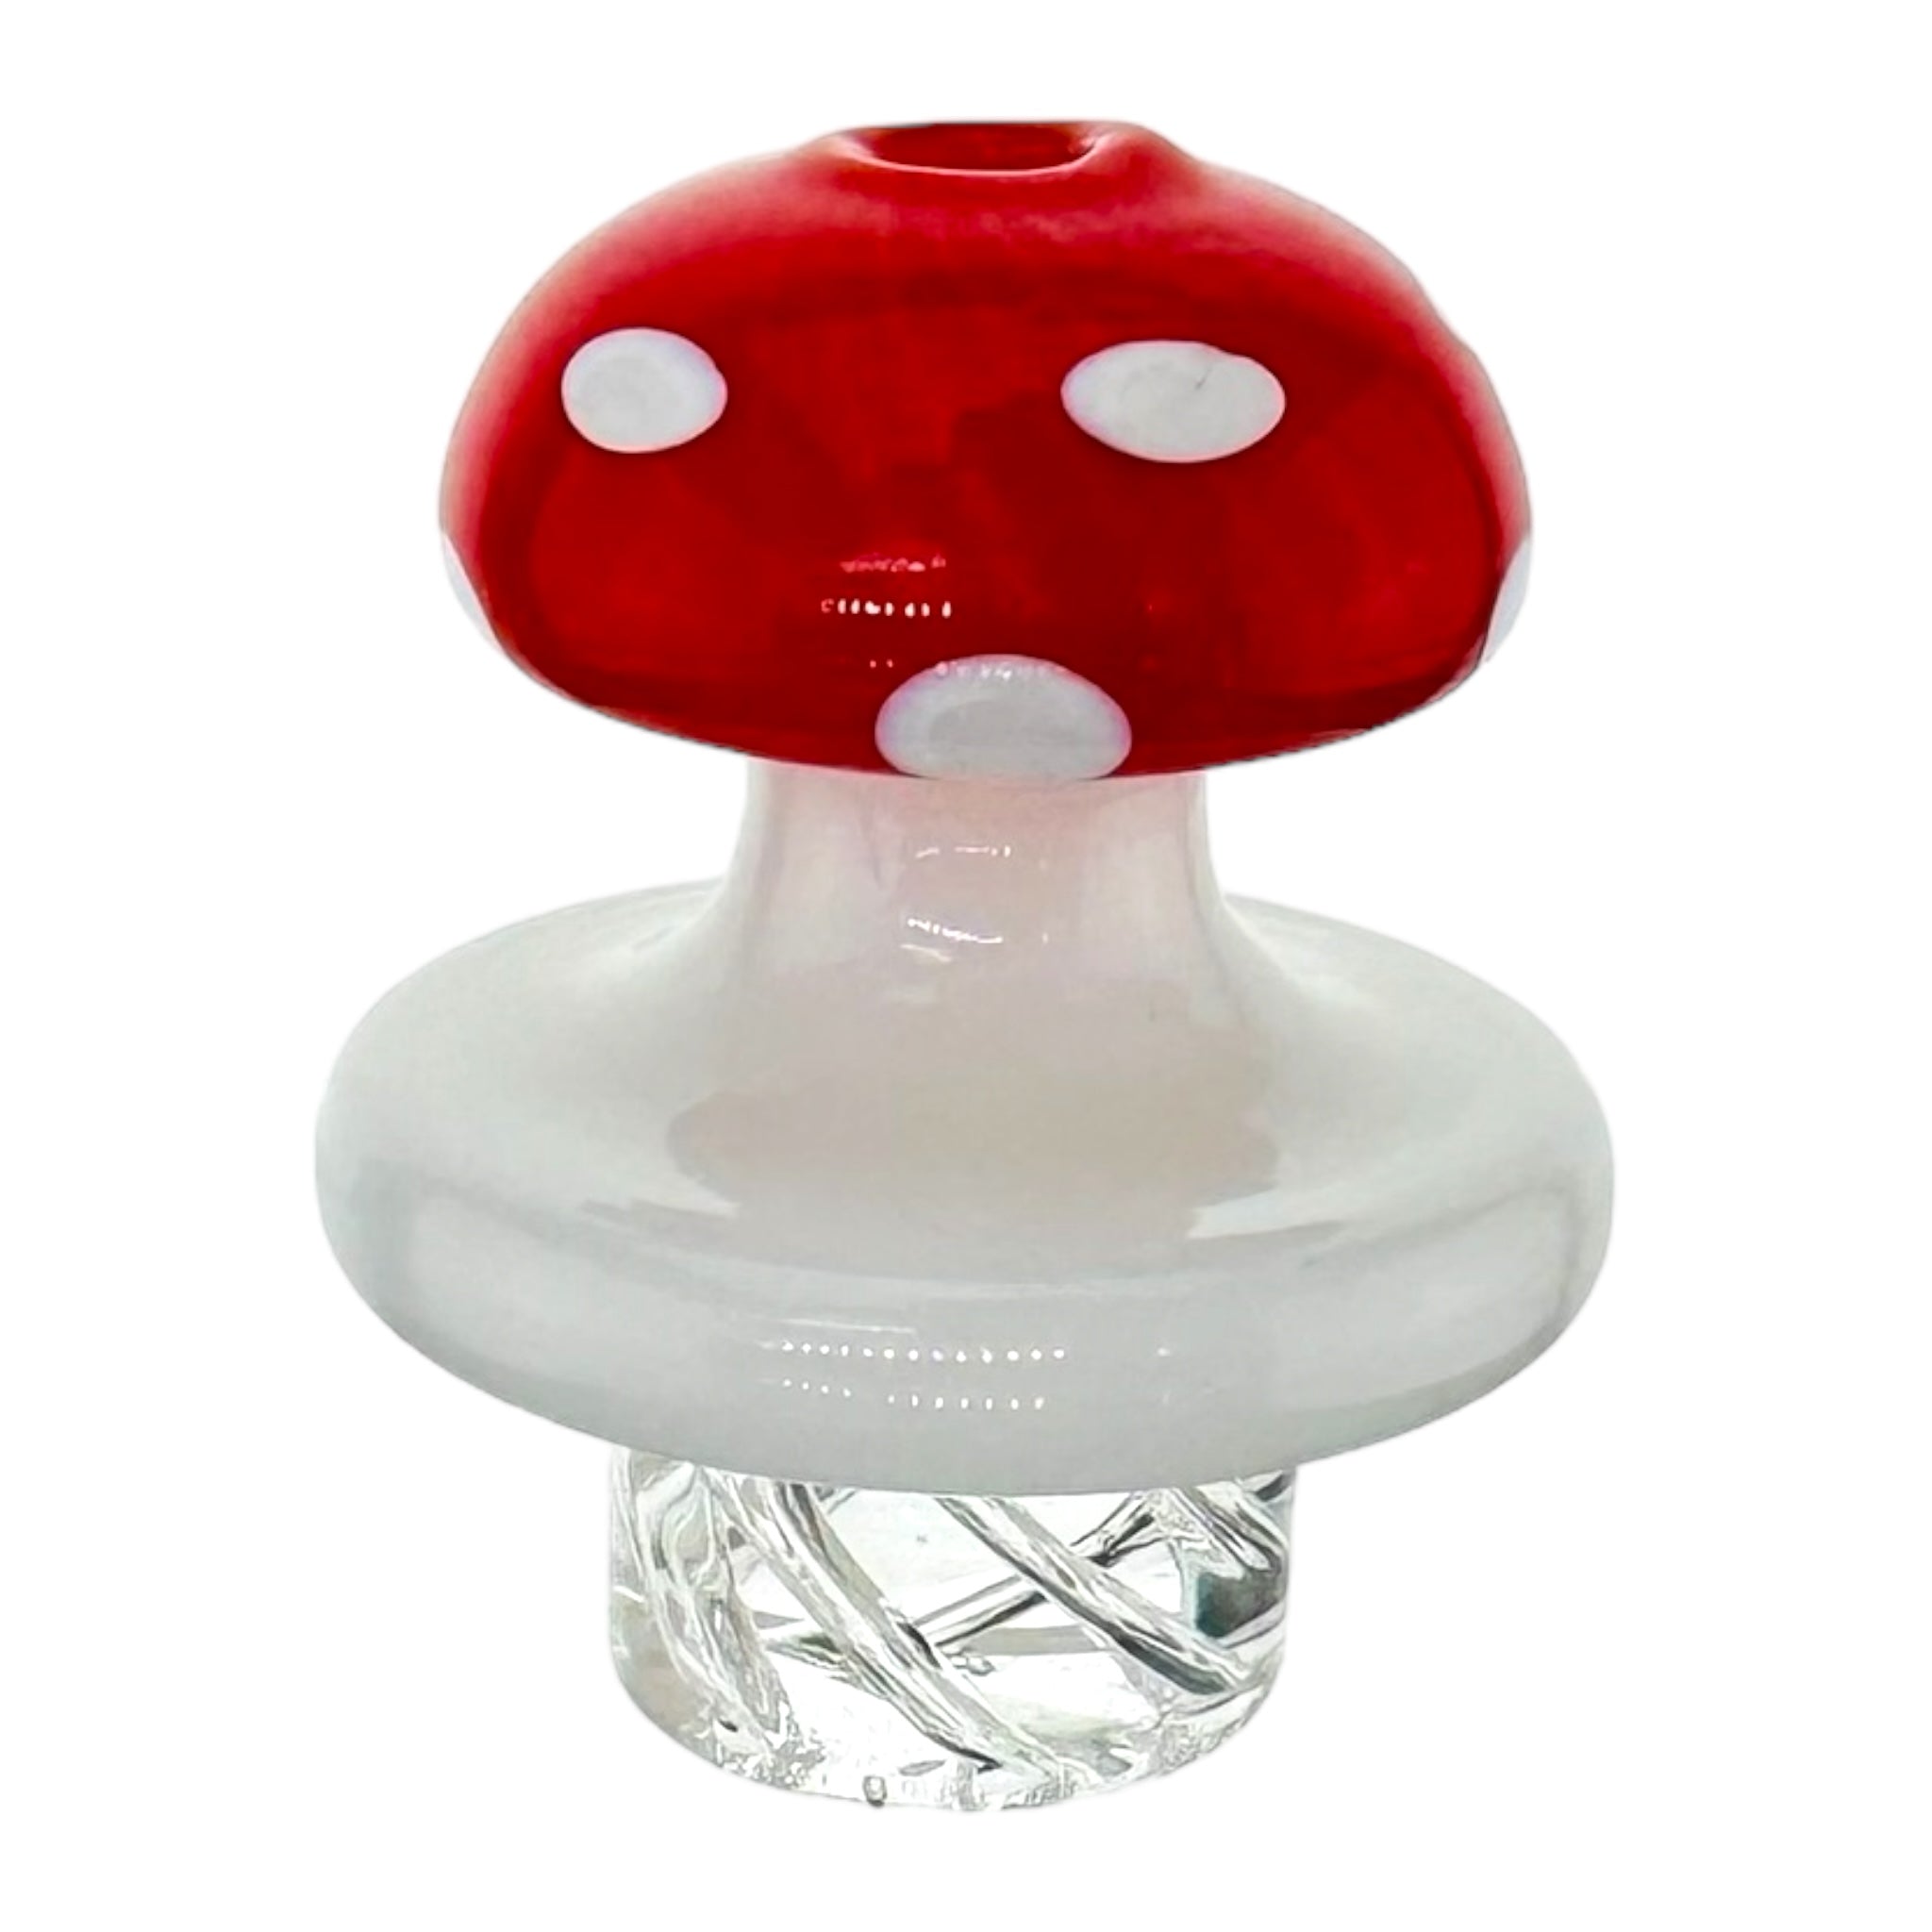 Spinner Carb Cap With Mushroom Top Red & White